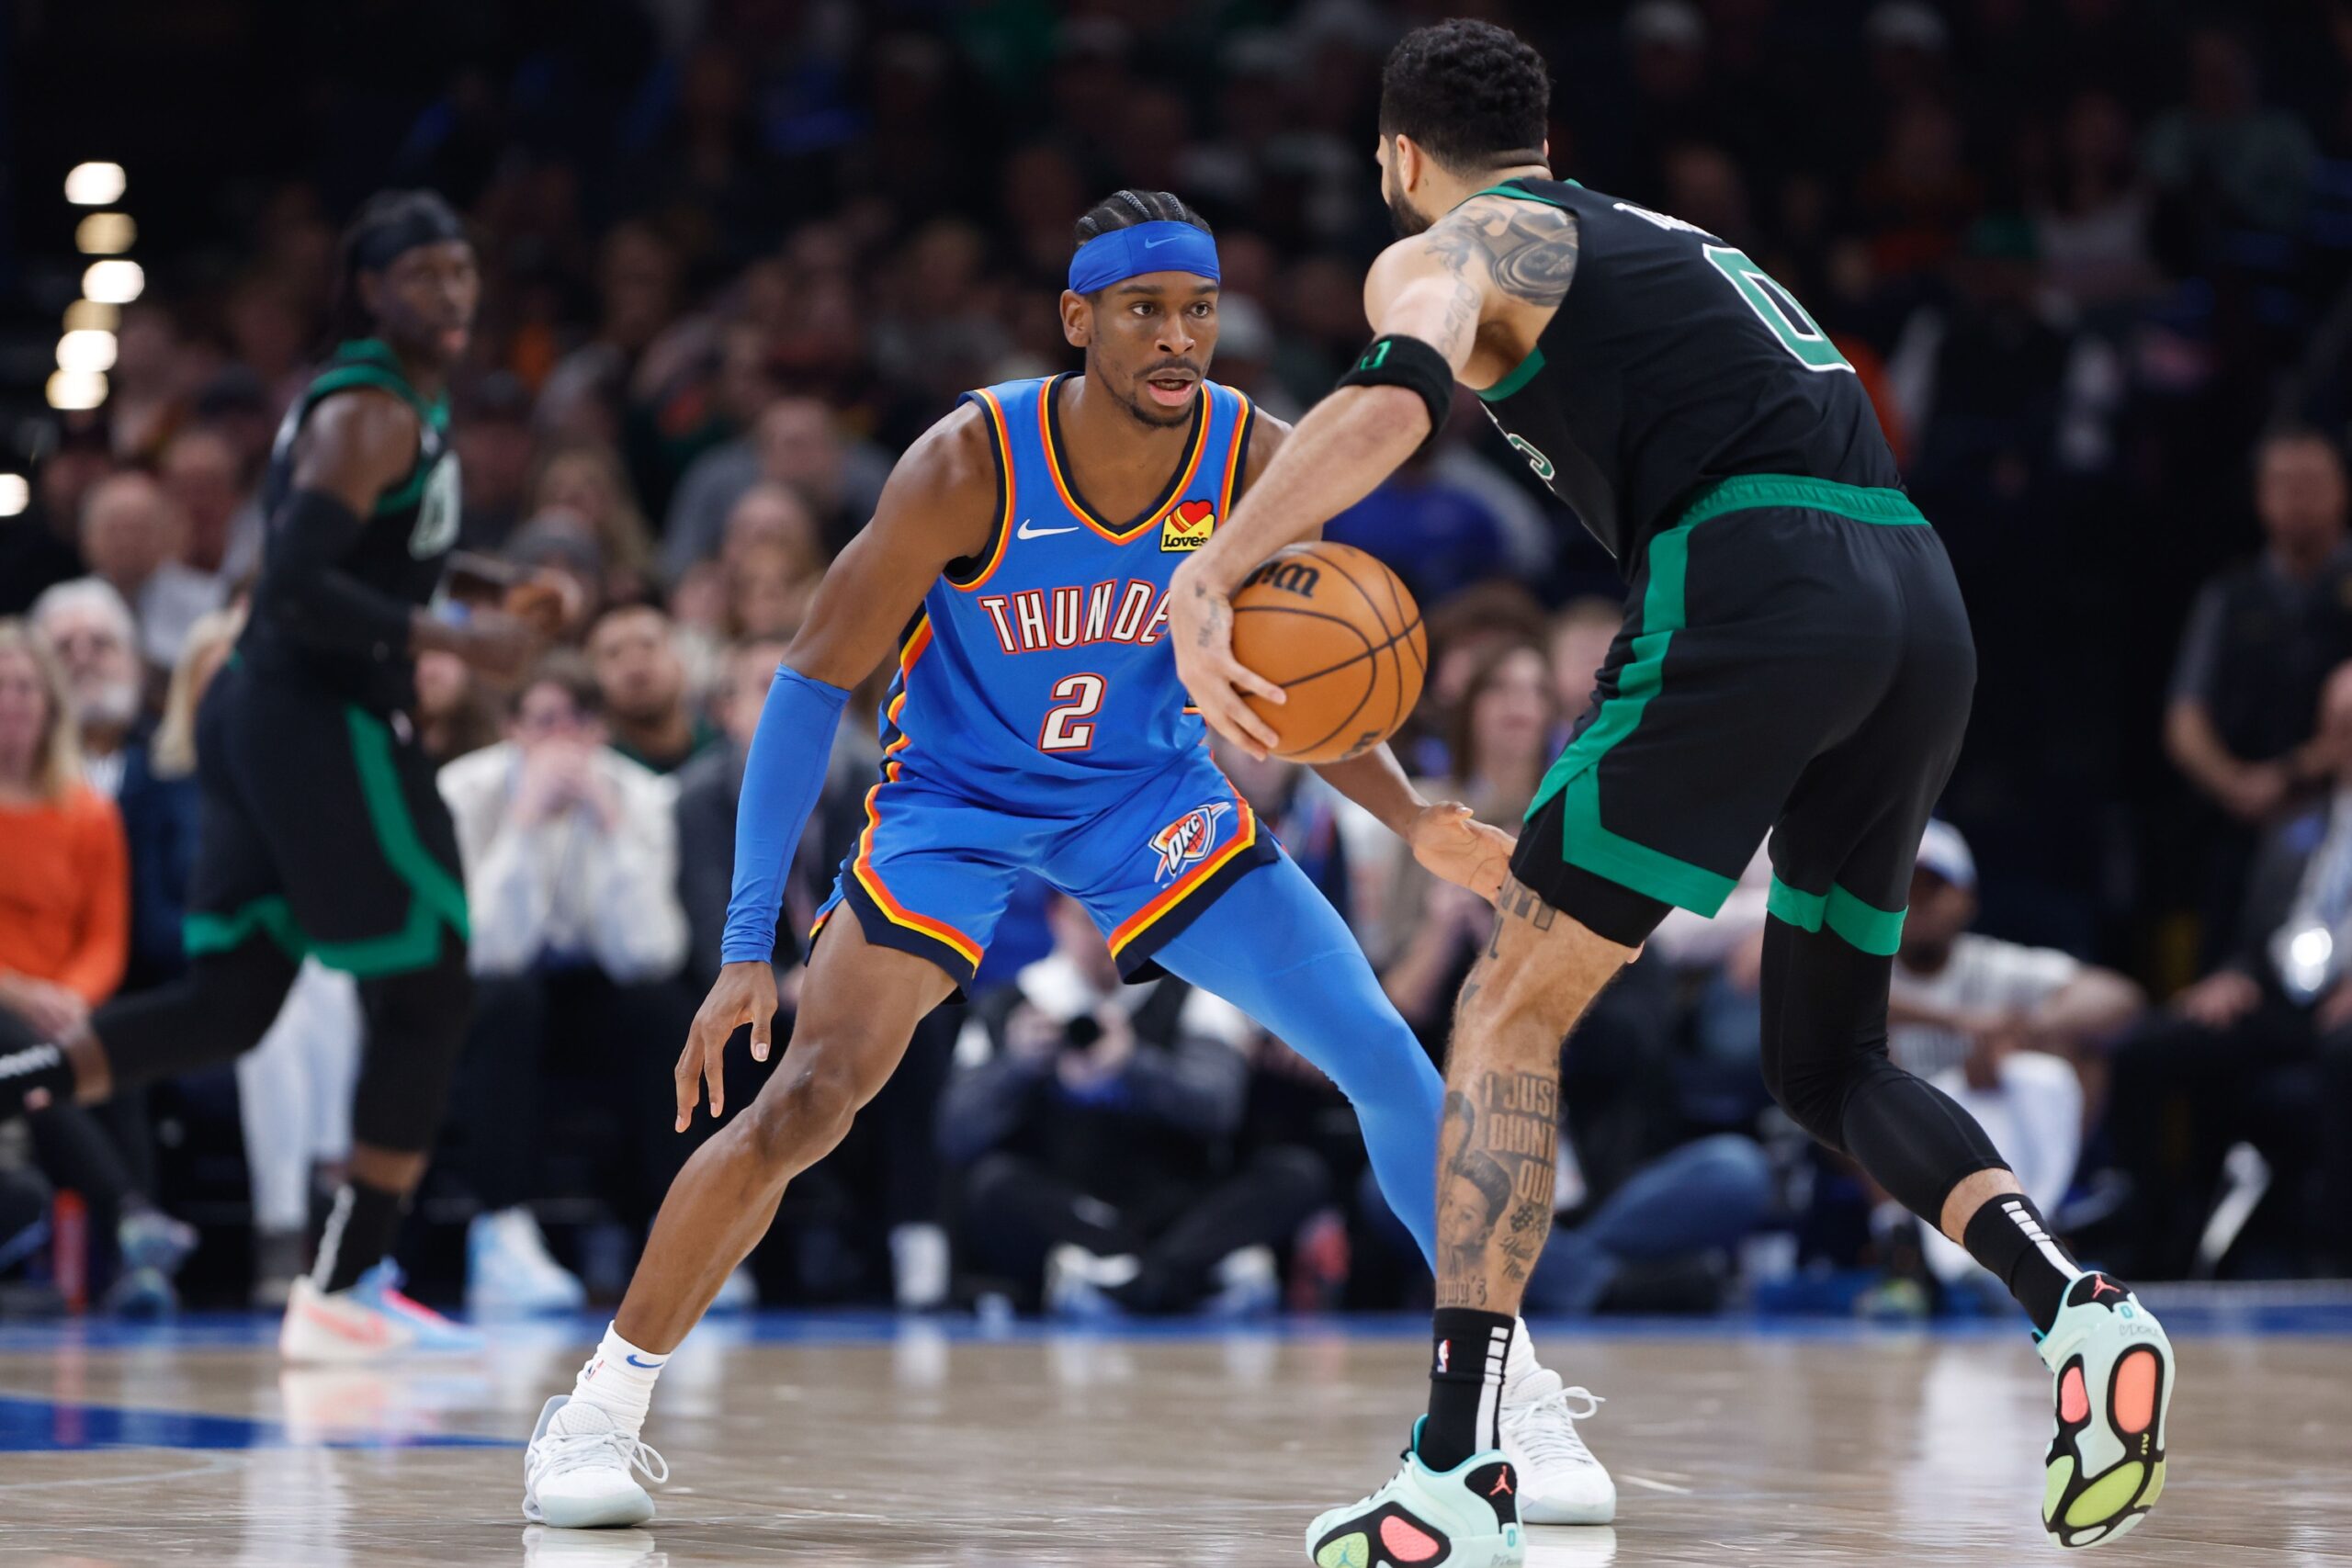 The Celtics and Thunder are two of the most dangerous teams heading into the playoffs.